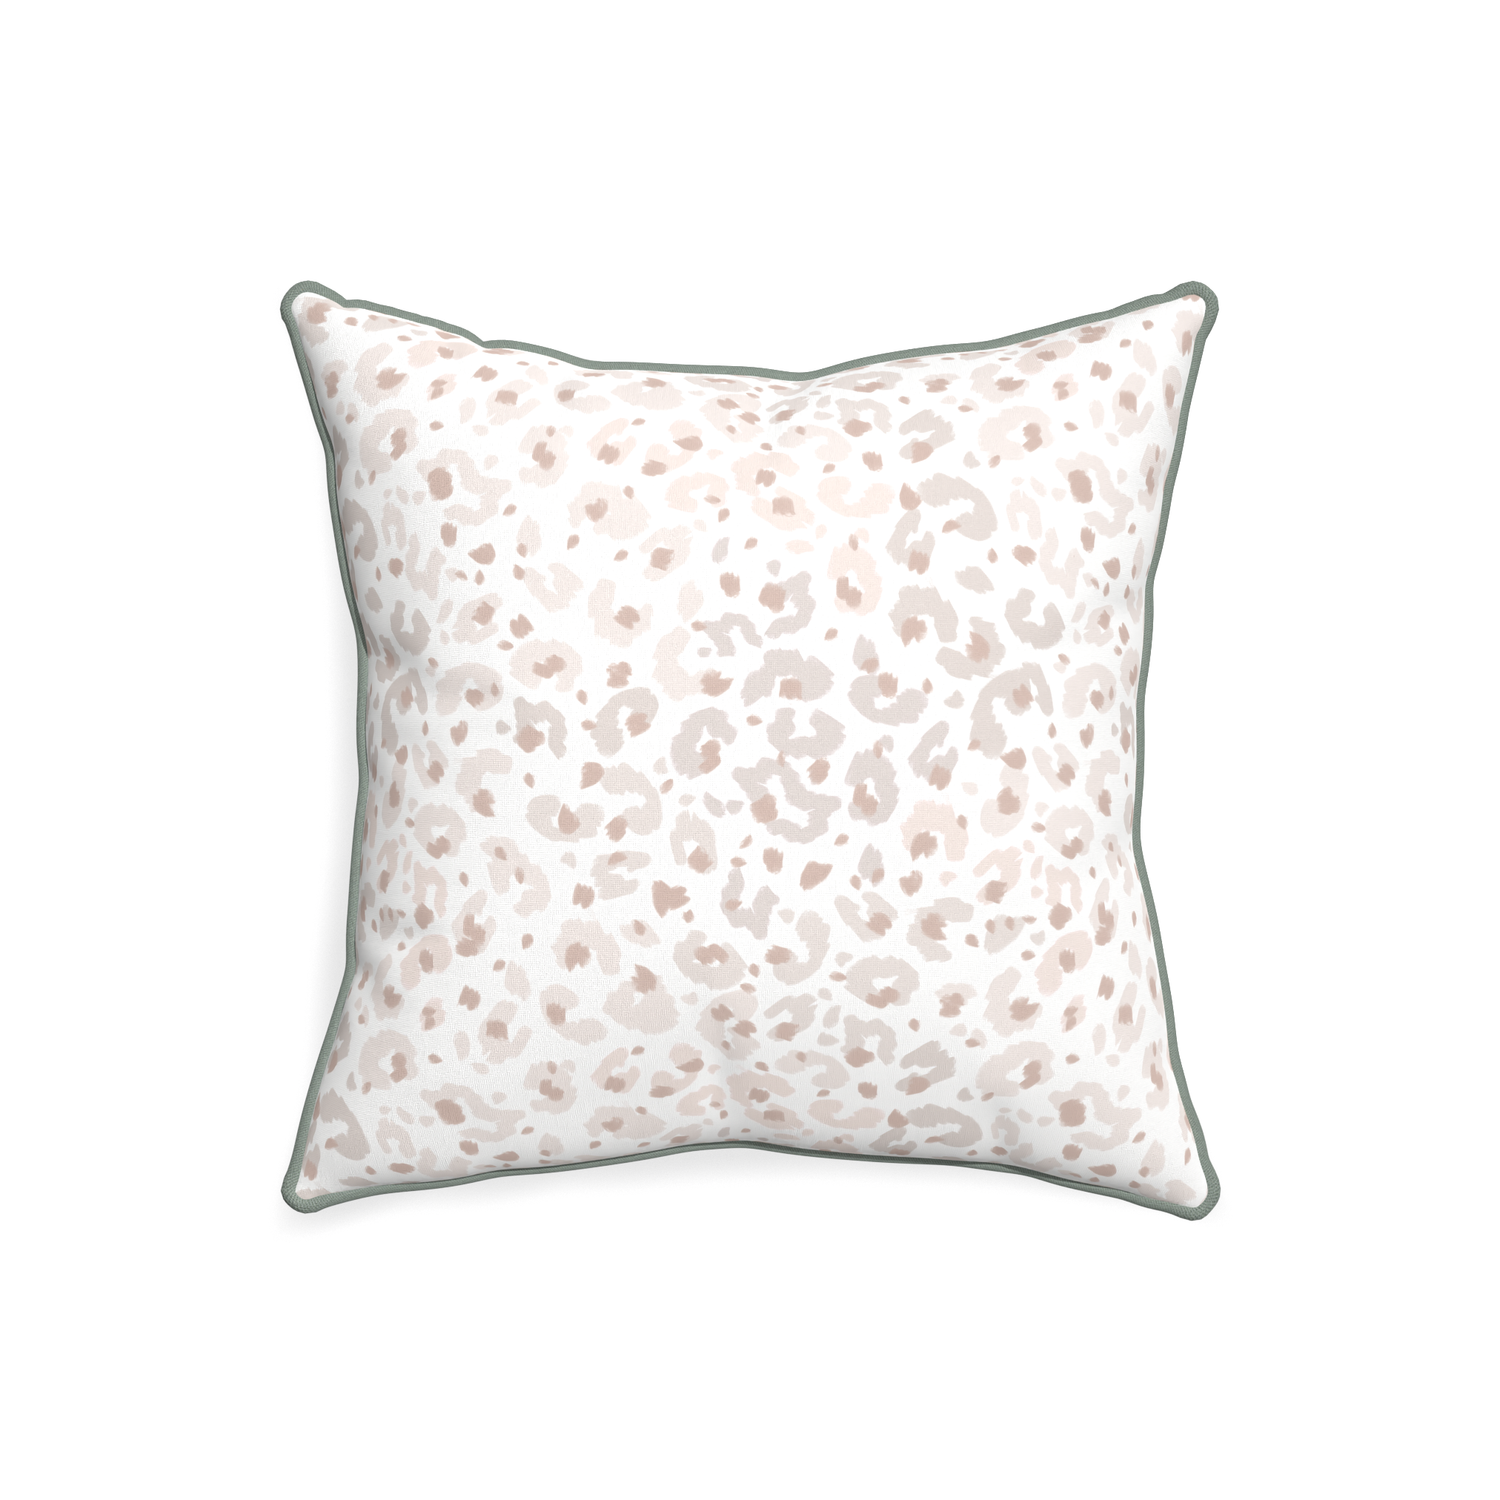 20-square rosie custom beige animal printpillow with sage piping on white background